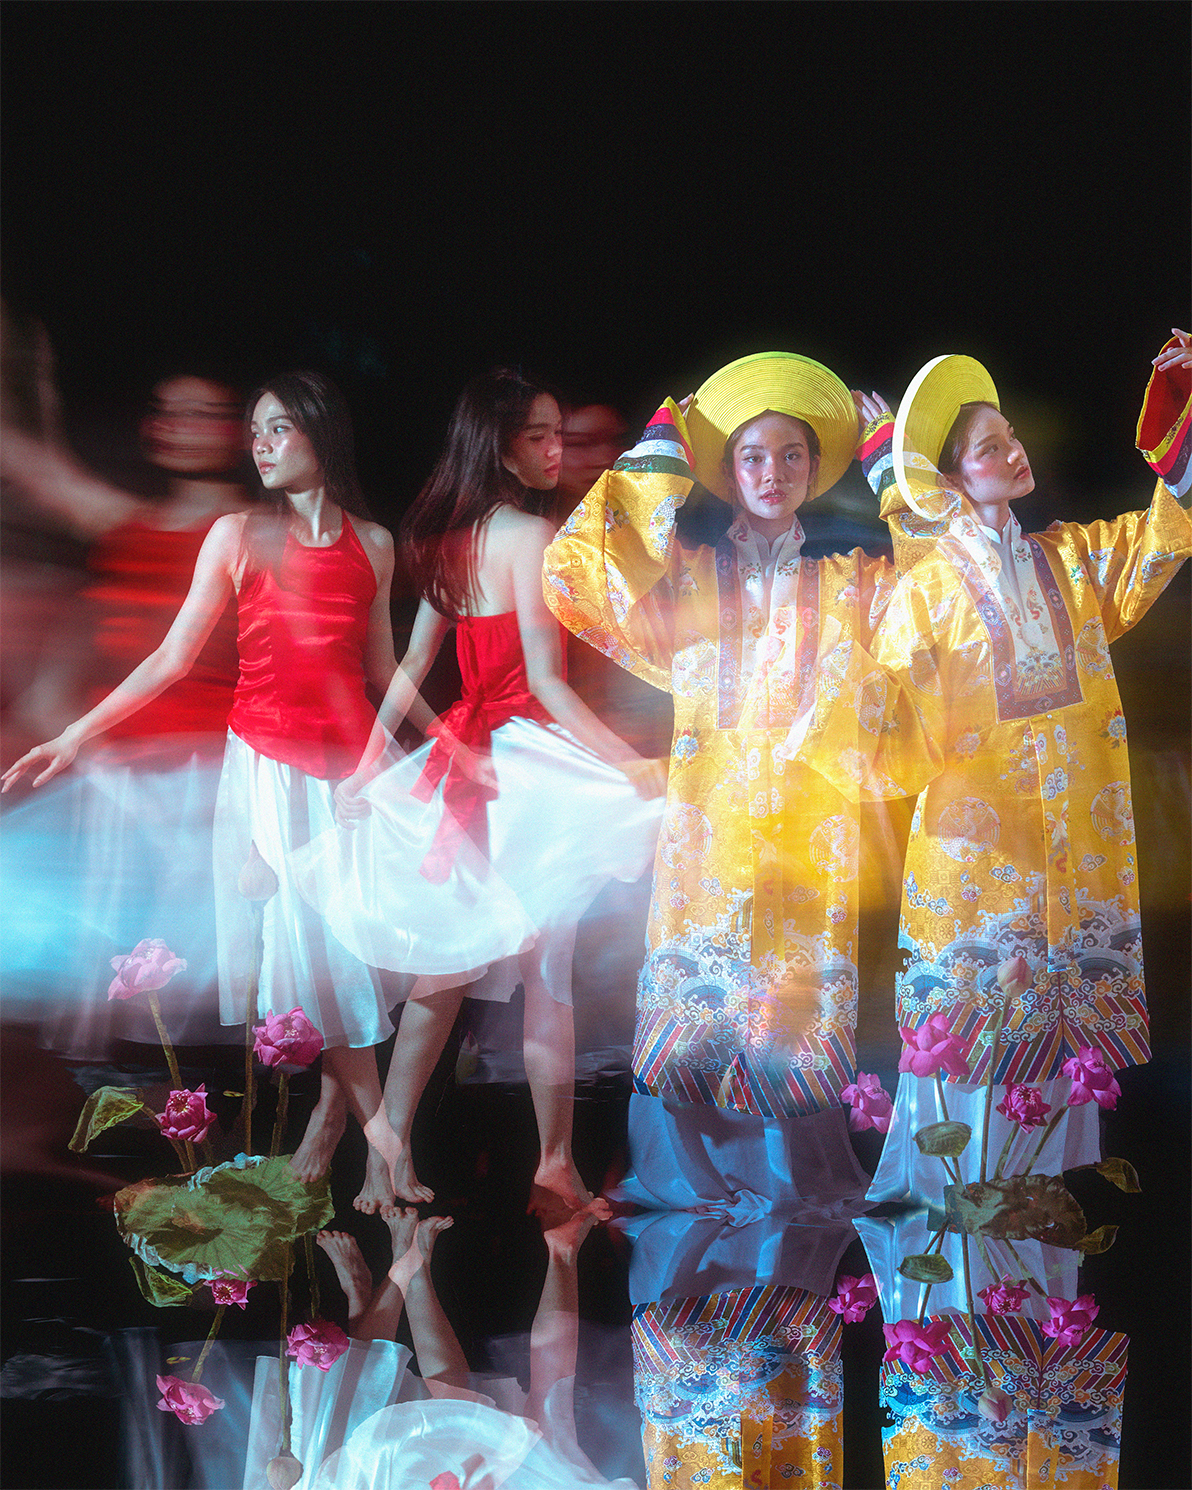 Photograph with multiple clones of a girl wearing a red top and white skirt spinning in a circle. To the right are clones of the girl in a yellow, flowery outfit. The clones are reflected onto the ground, where bright purple flowers sit.